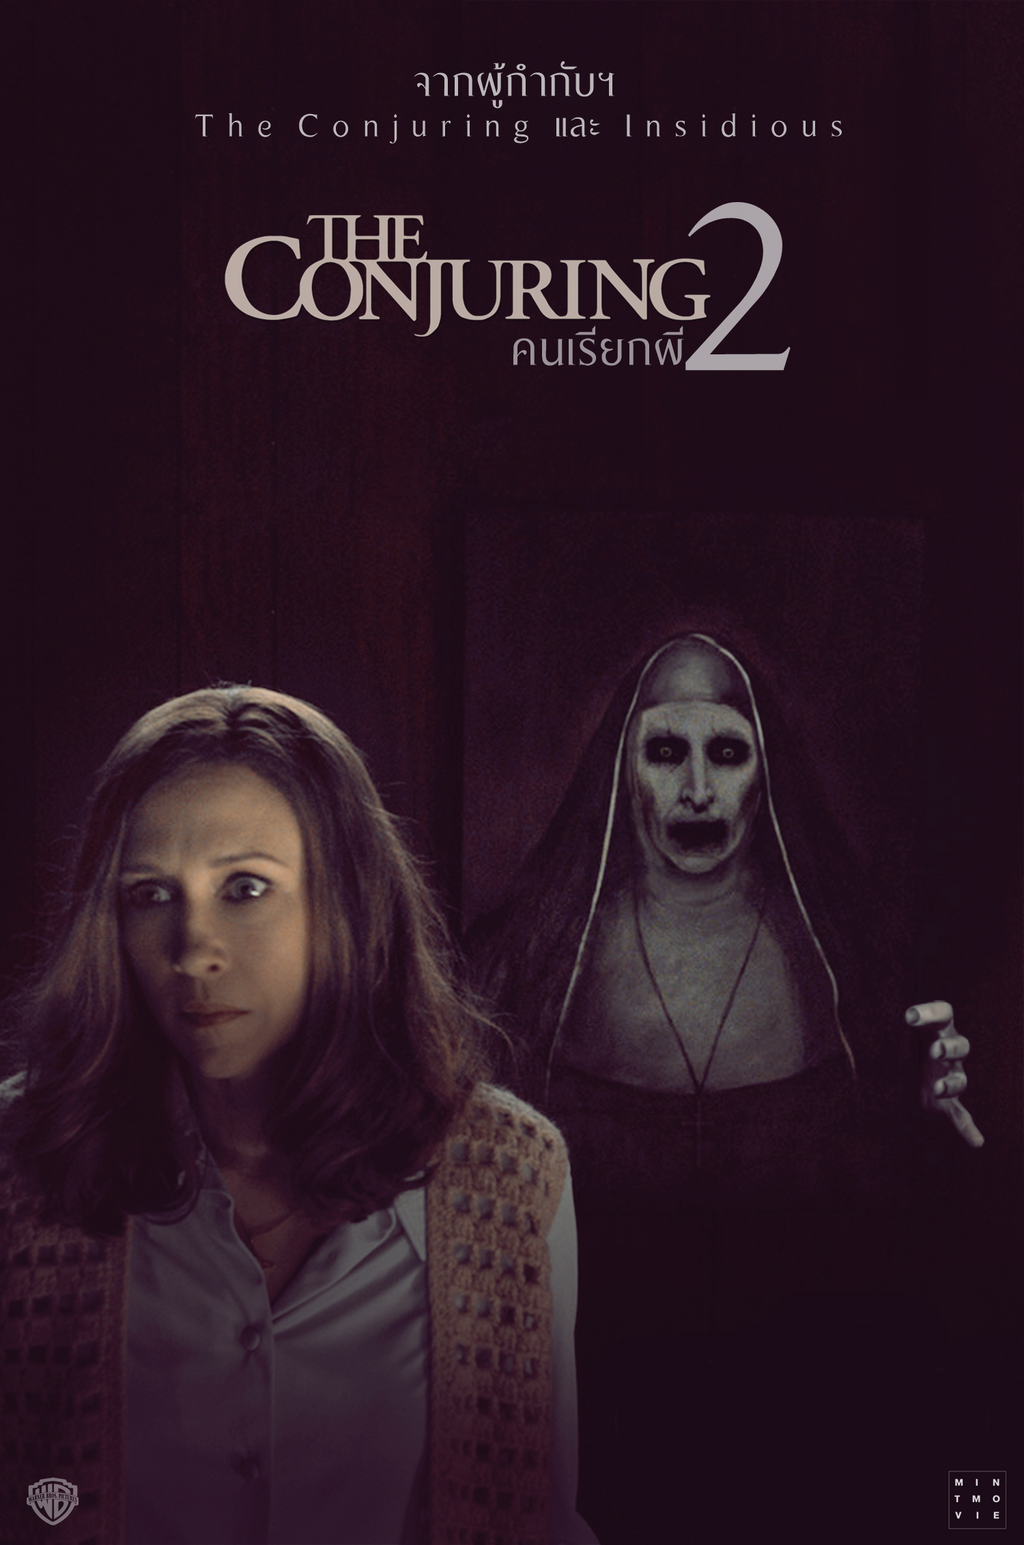 The Conjuring 2 (English) 2 movie full hd 1080p free